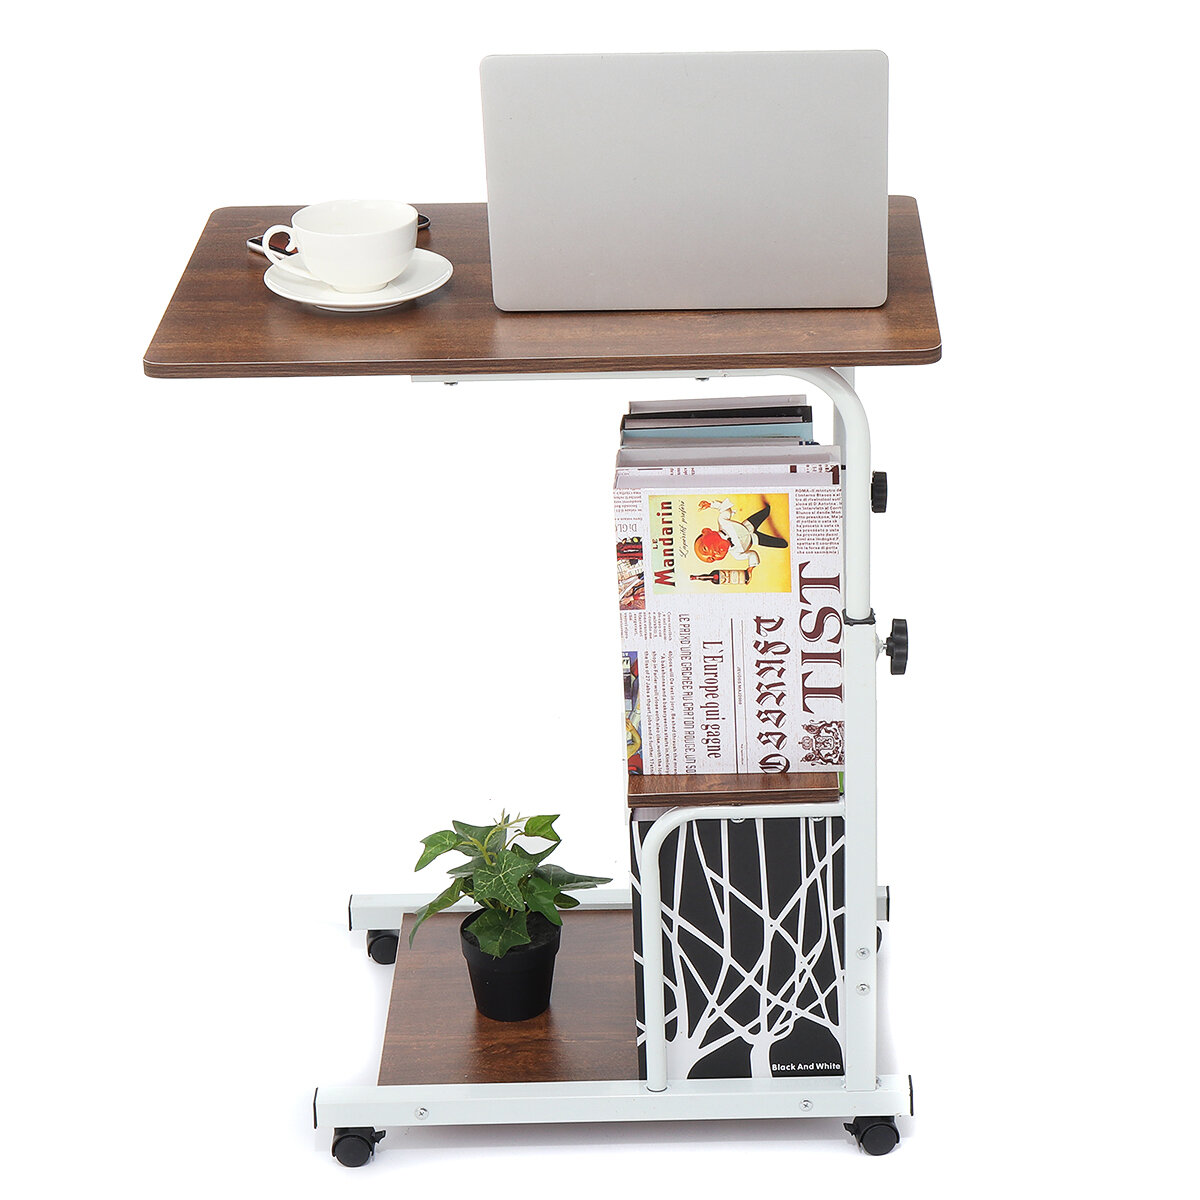 

60x40cm Large Size Desktop Computer HeightAdjustable Laptop Rotate Bed Table Sofa Lifted Standing Desk